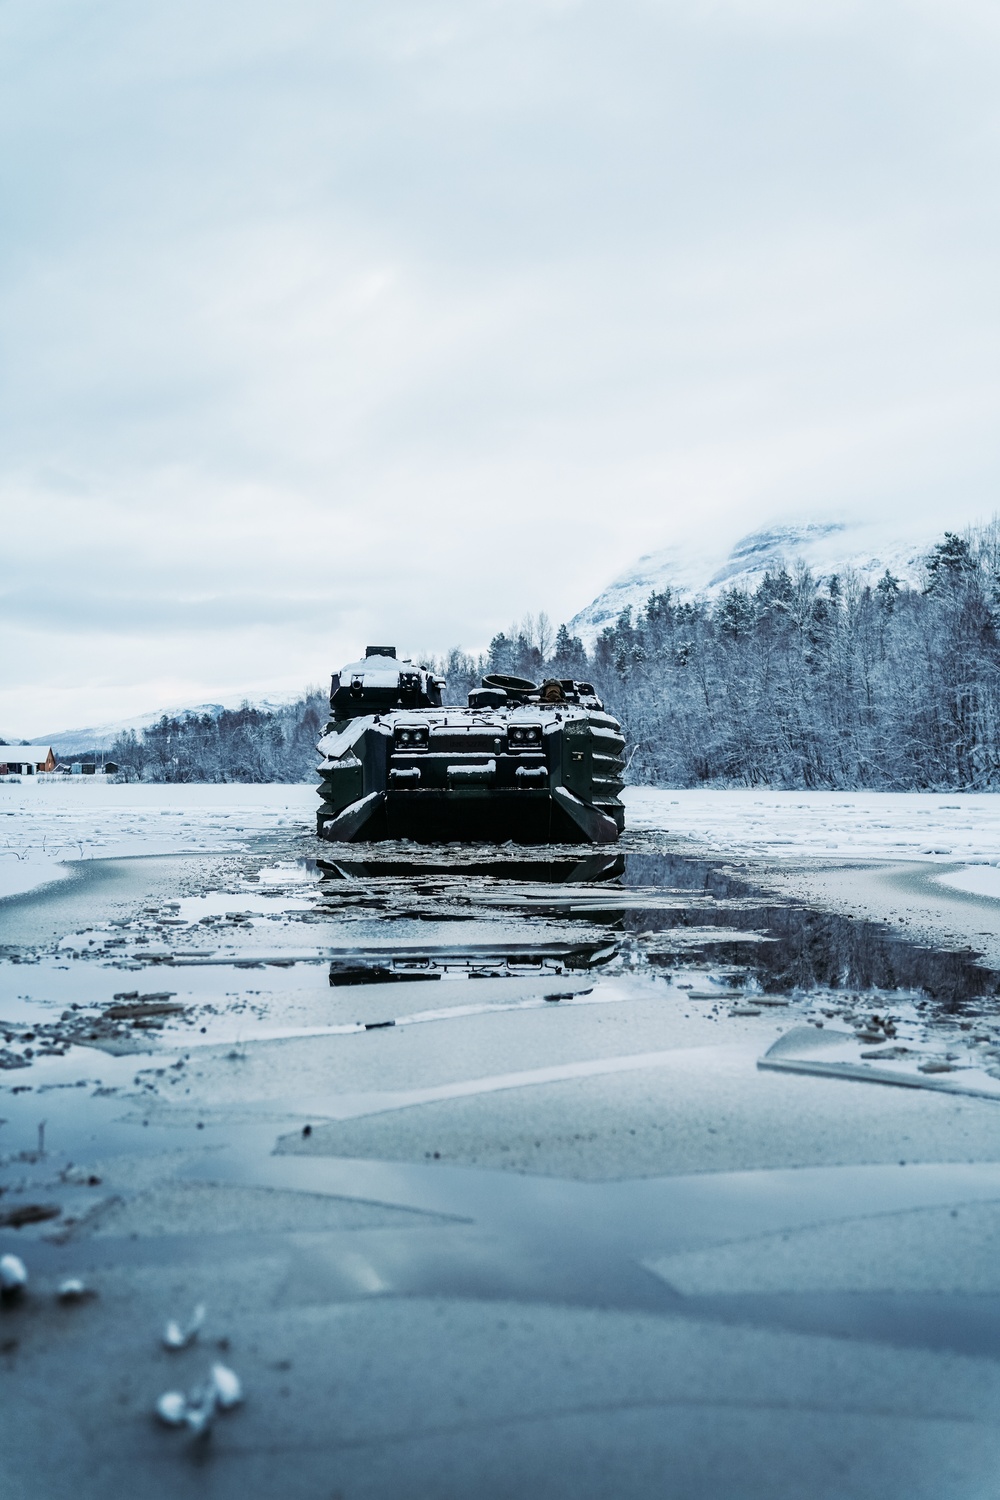 AAVs in the Arctic